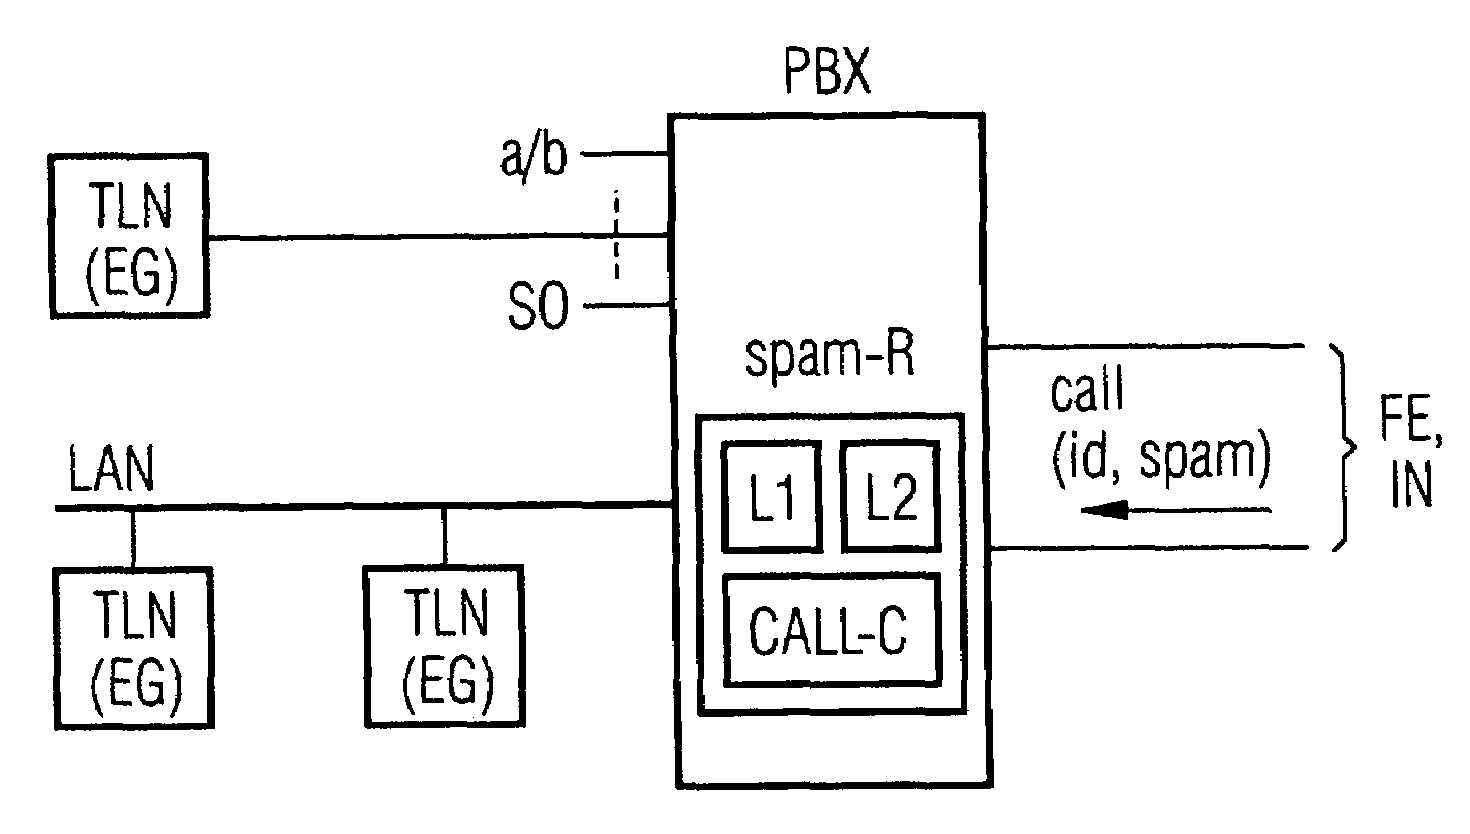 Method for Protecting Against Undesired Telephone Advertising in Communication Networks